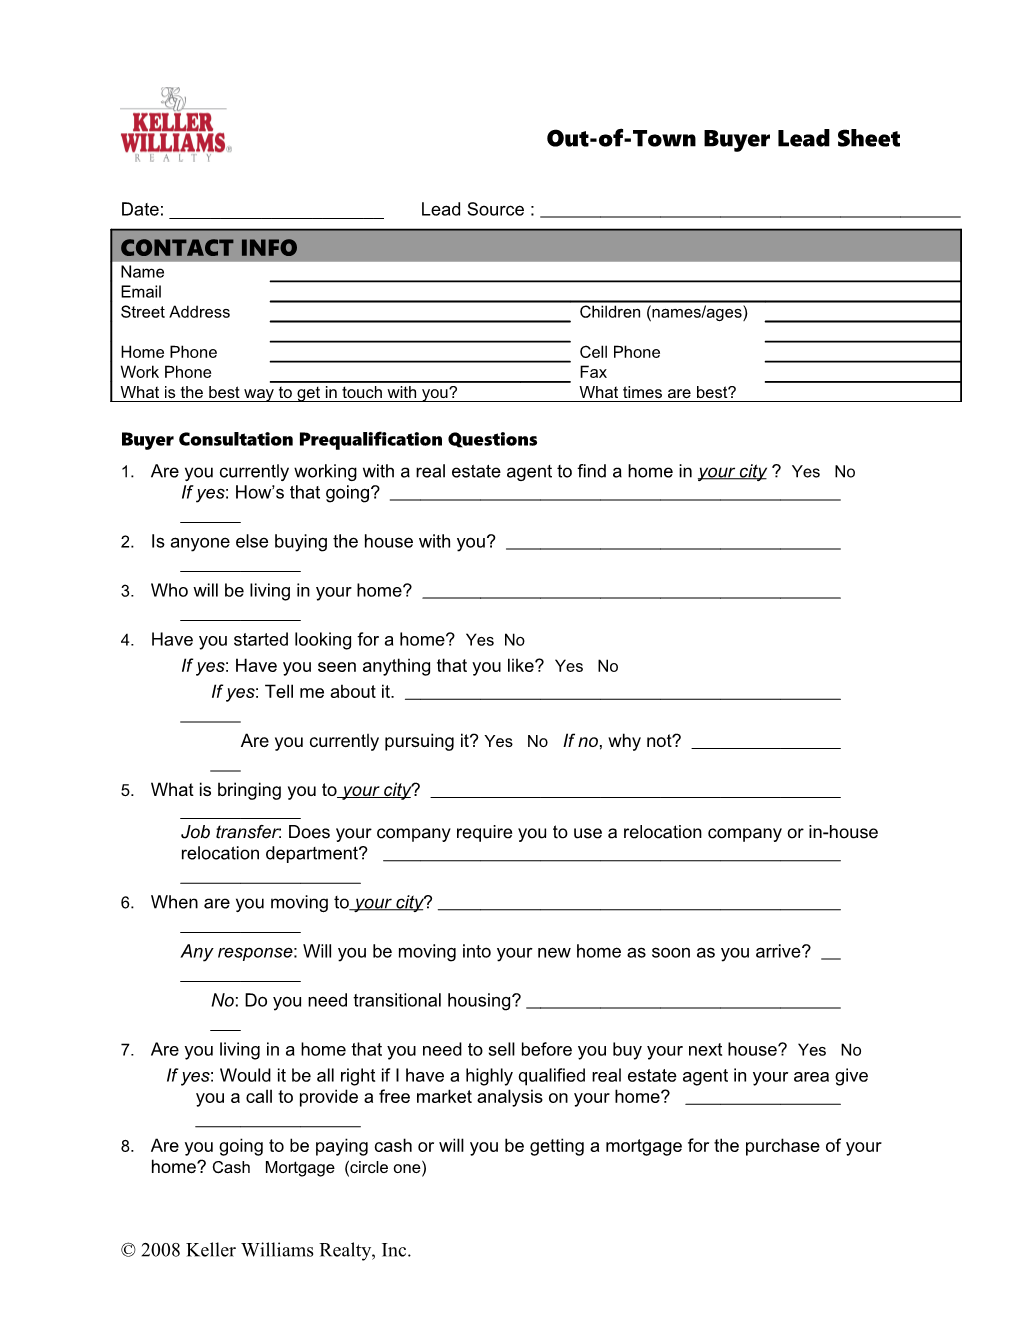 Out-Of-Town Buyer Lead Sheet